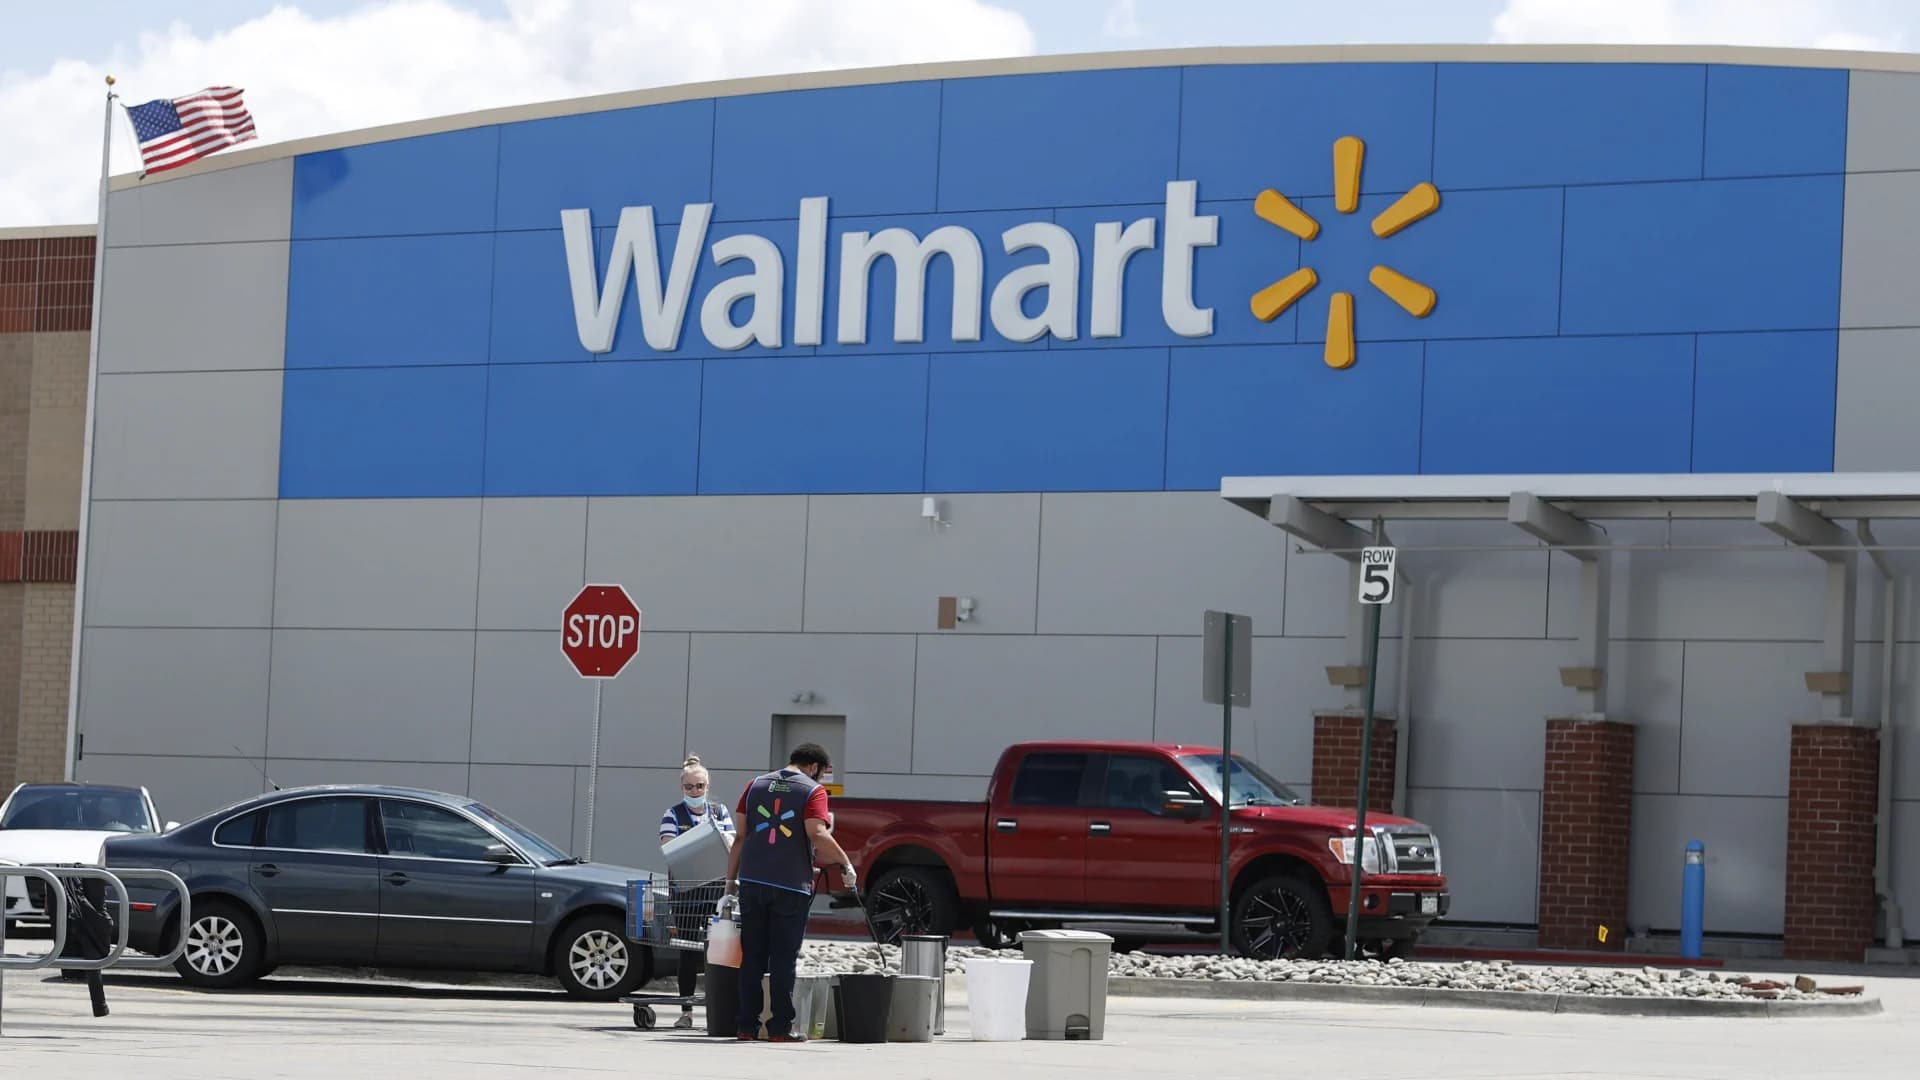 Walmart to require customers to wear masks at all its stores